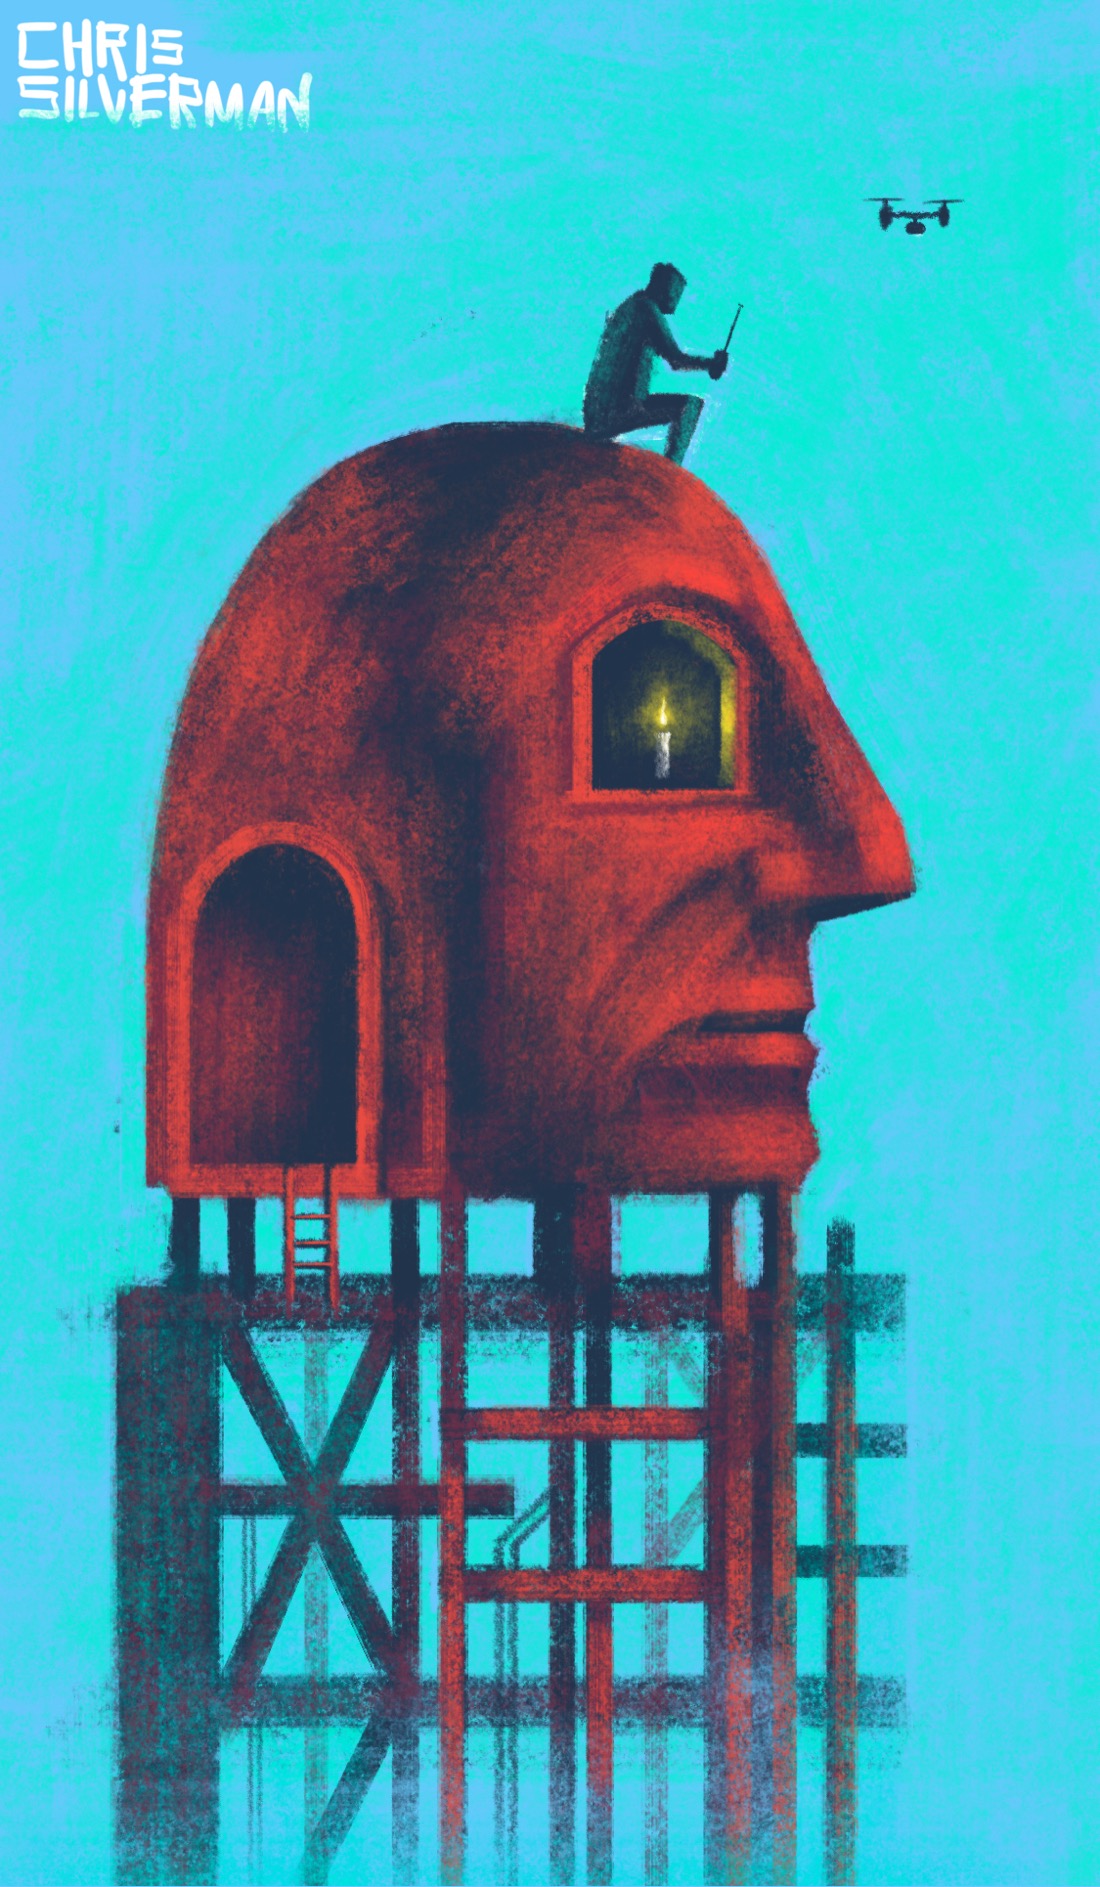 A giant head that looks like it is made of reddish iron, mounted on a rickety-looking tower of beams and crossbeams. The head is the size of a small house and has an open, arched doorway in the back, and an open, arched window for an eye in which a lit candle is placed. On top of the head sits a person operating a quad copter. The only thing visible in the background is blue sky, suggesting that the tower is quite tall.